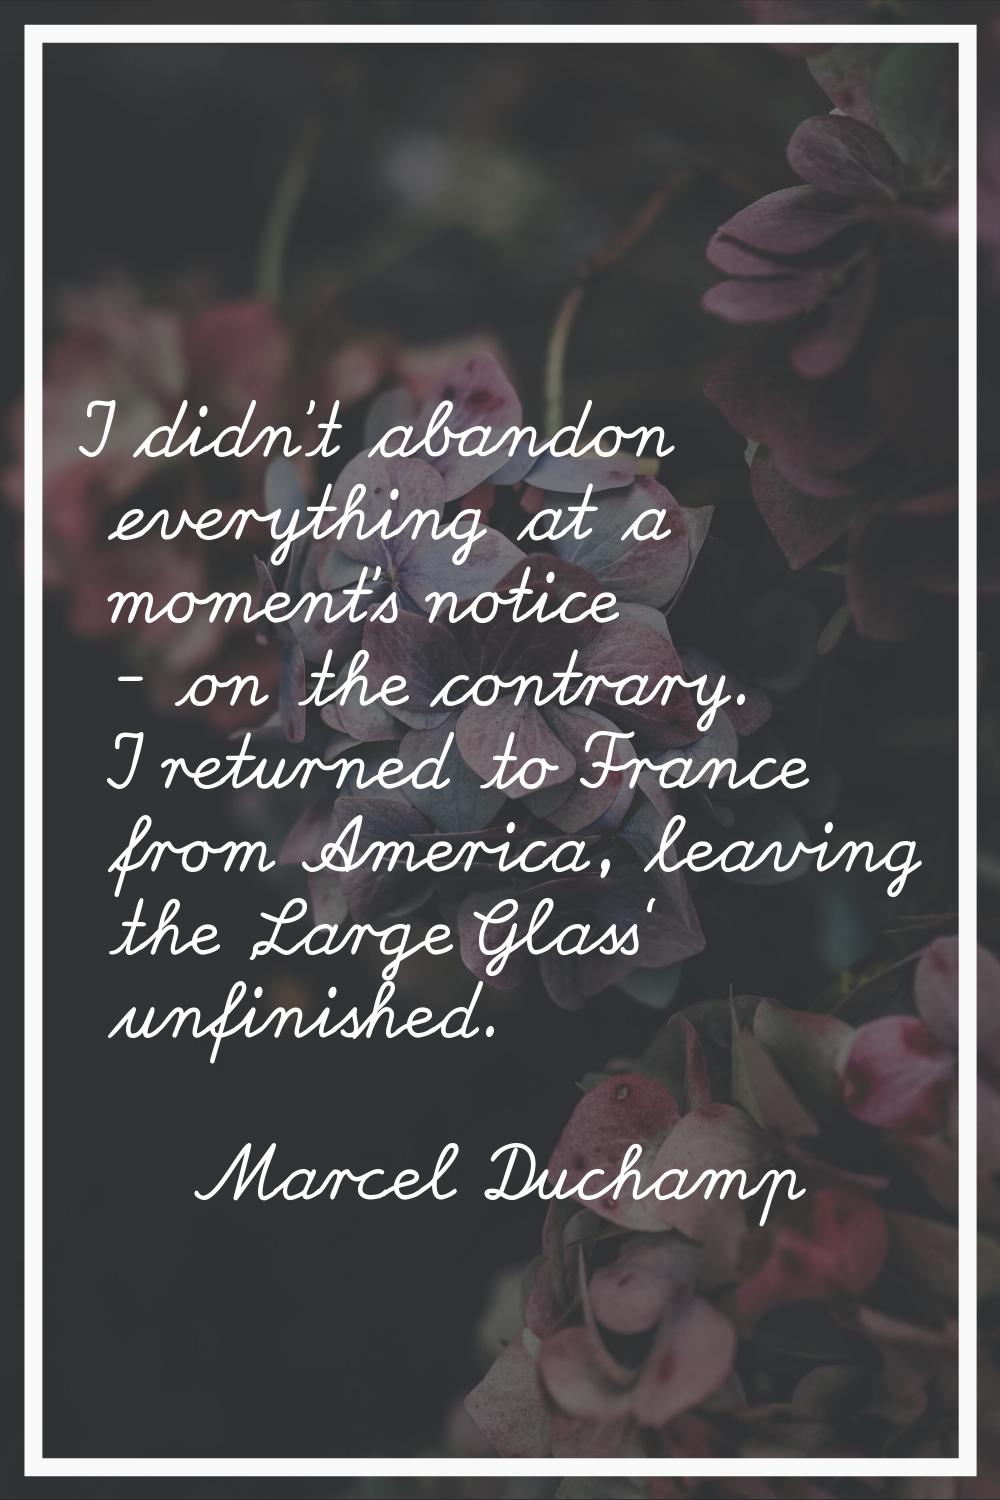 I didn't abandon everything at a moment's notice - on the contrary. I returned to France from Ameri